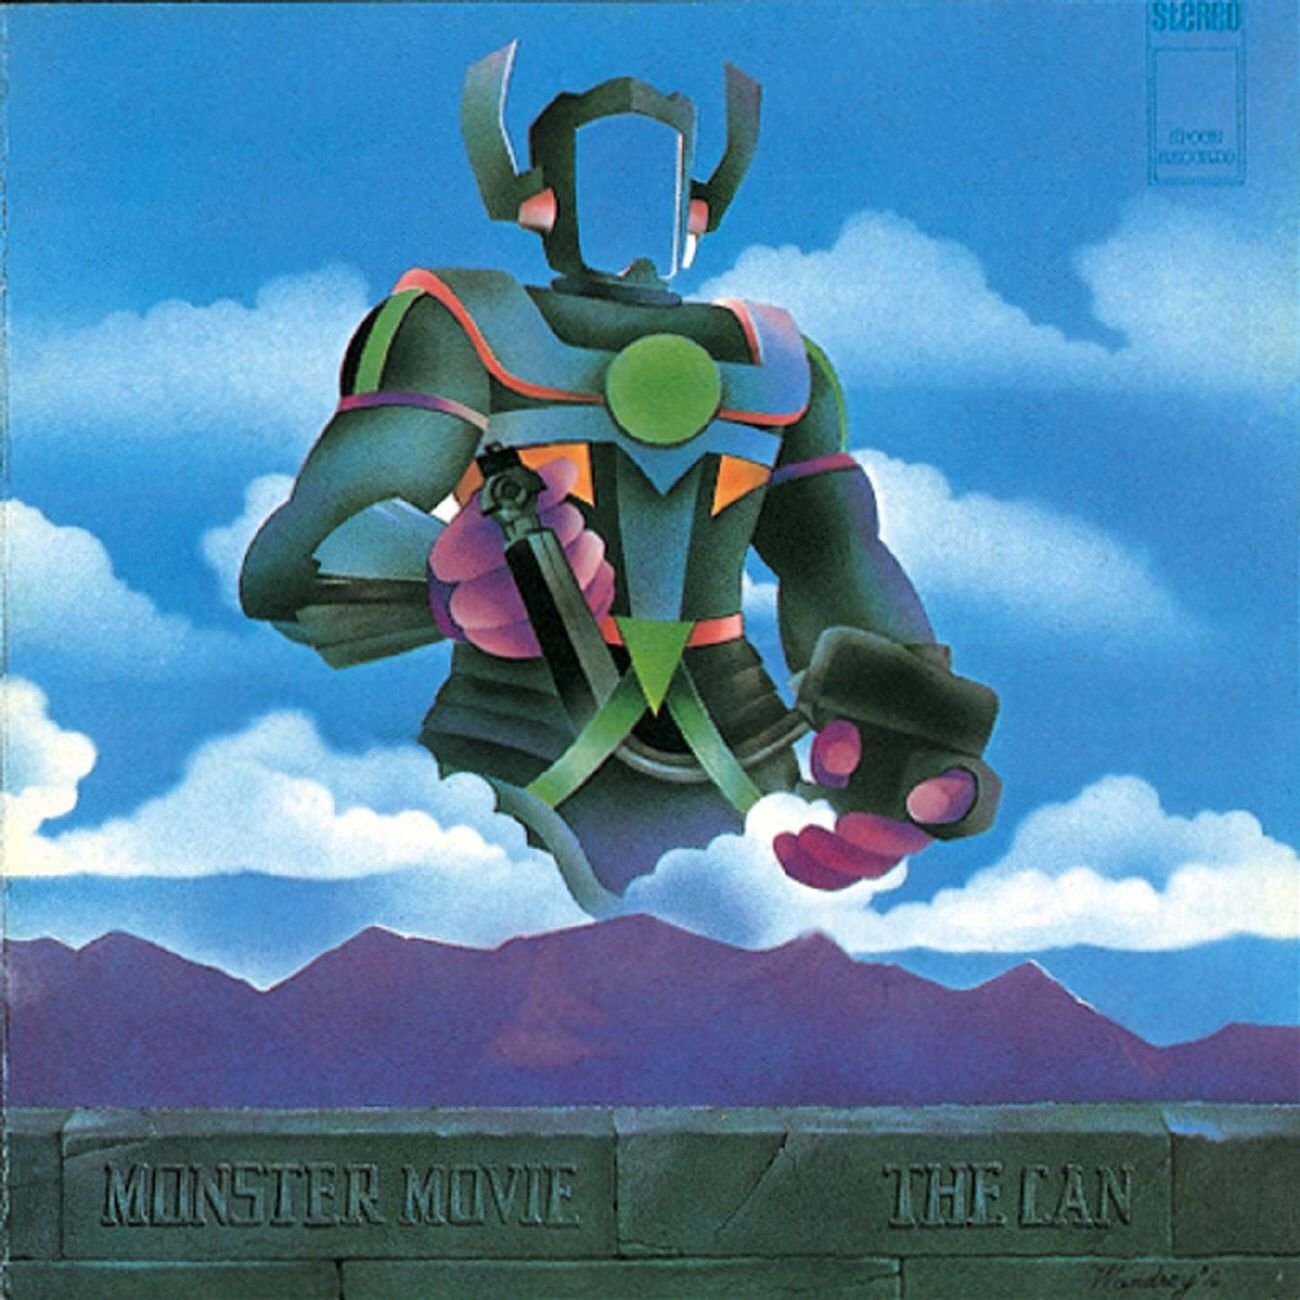 Can "Monster Movie" LP